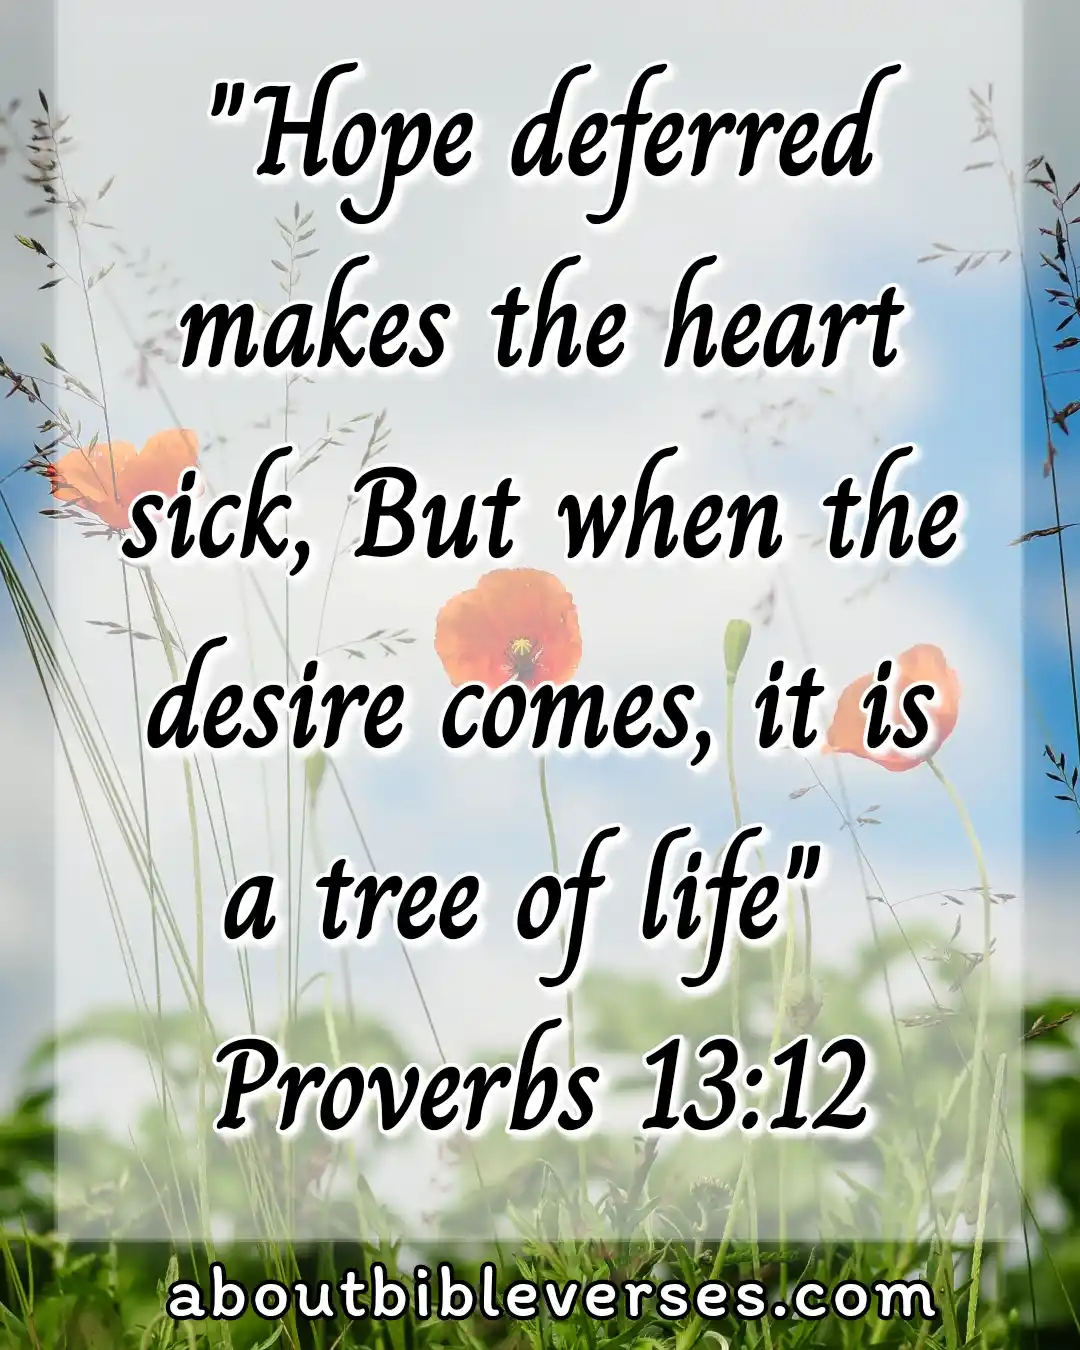 Bible Verses About Victory Over Sickness And Disease (Proverbs 13:12)